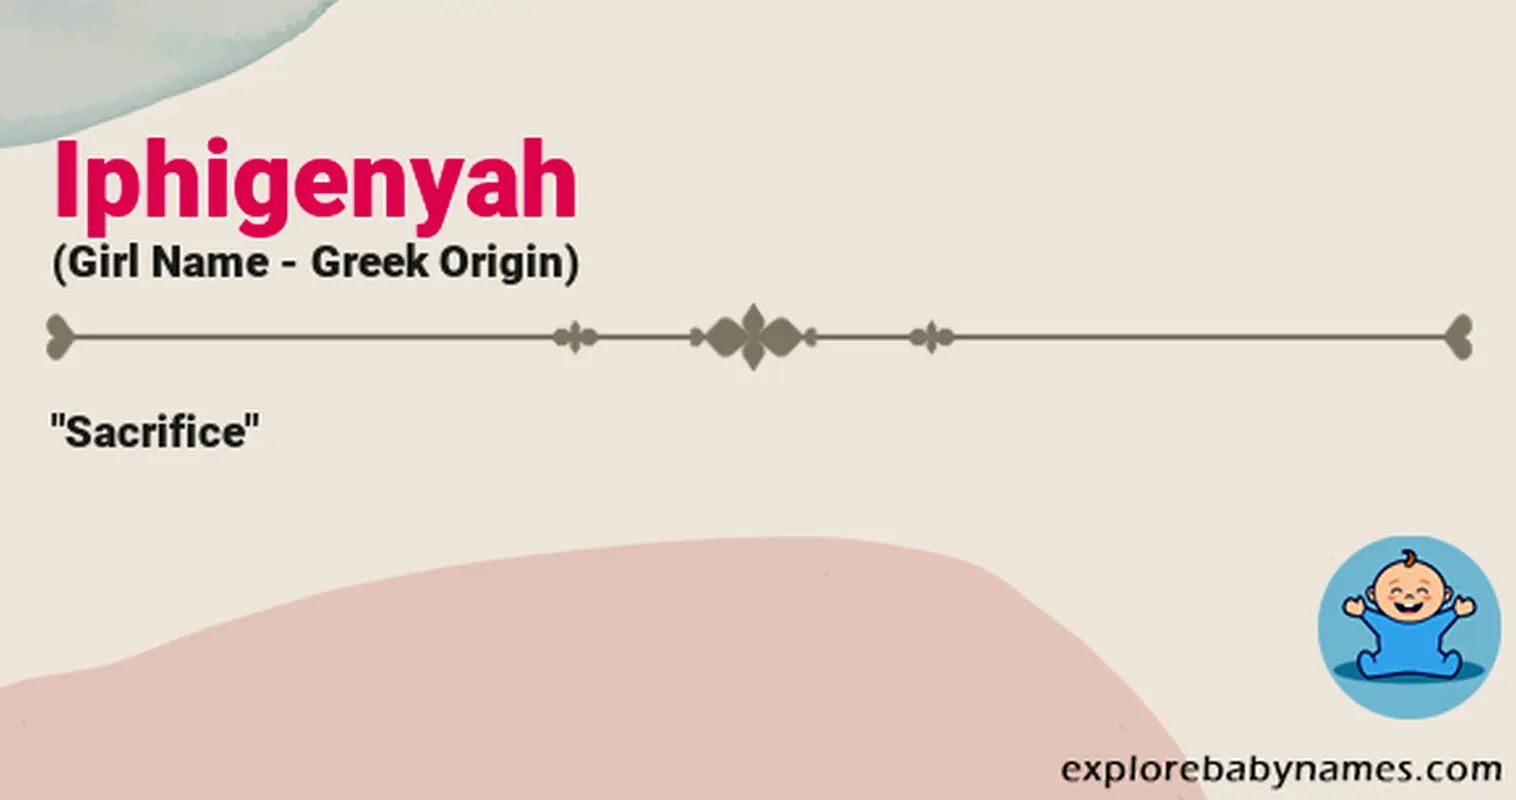 Meaning of Iphigenyah